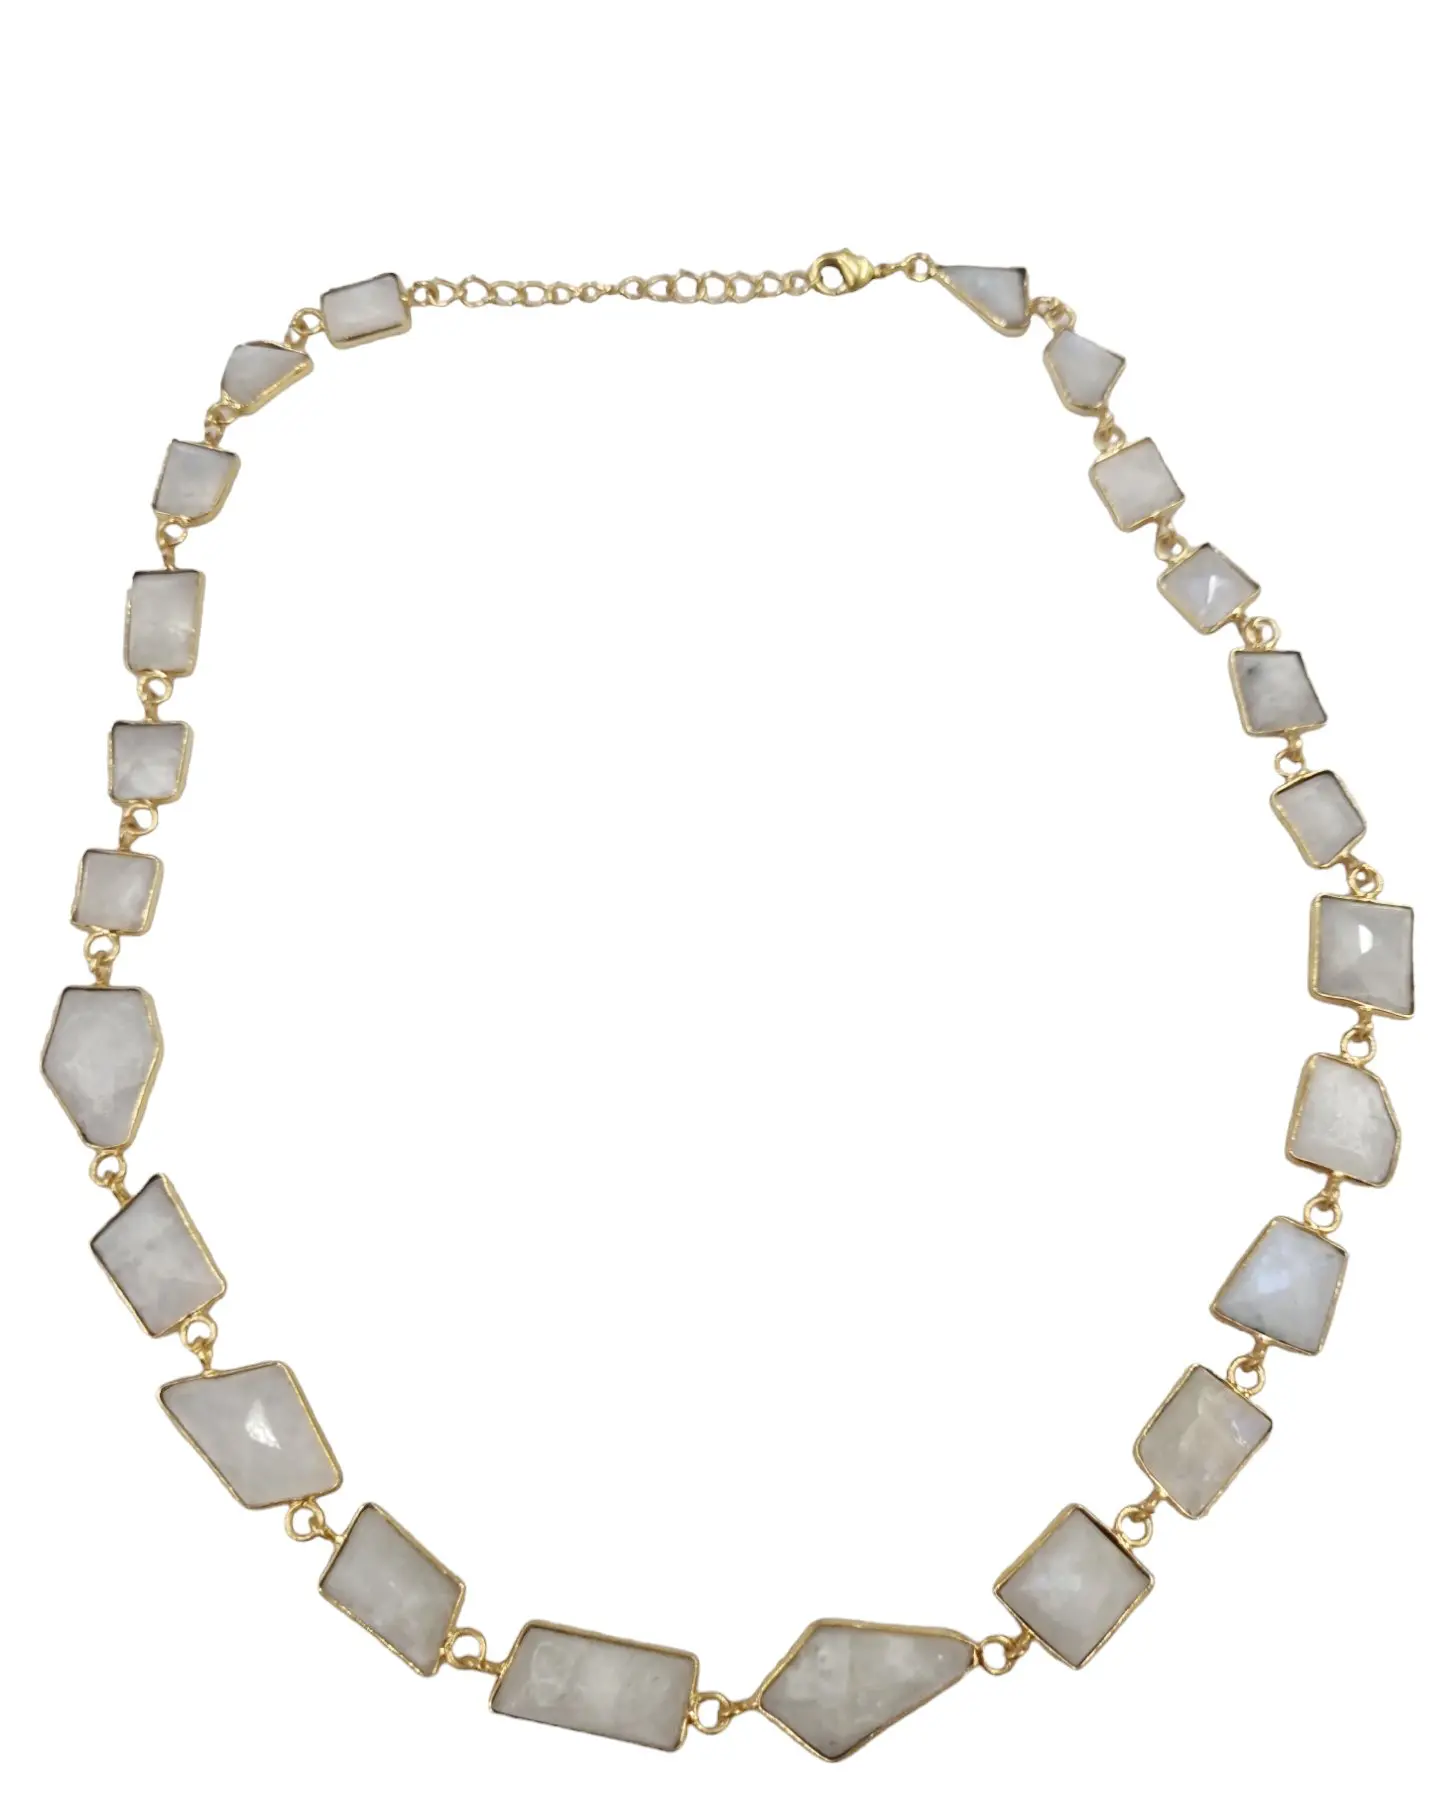 Adjustable choker necklace with moonstone set in brass, length 46cm